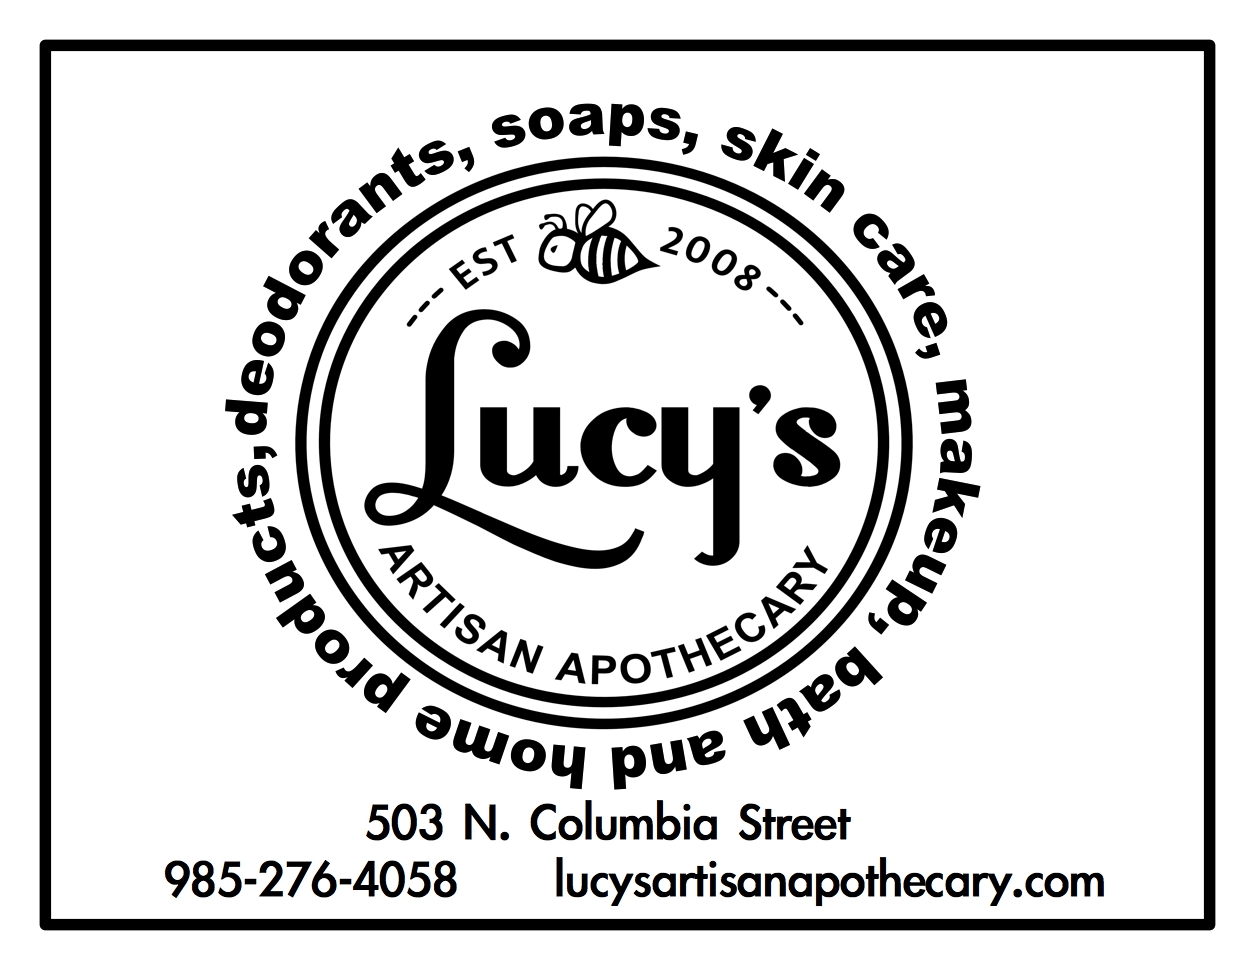 Holiday Gifts At Lucy’s Artisan Apothecary